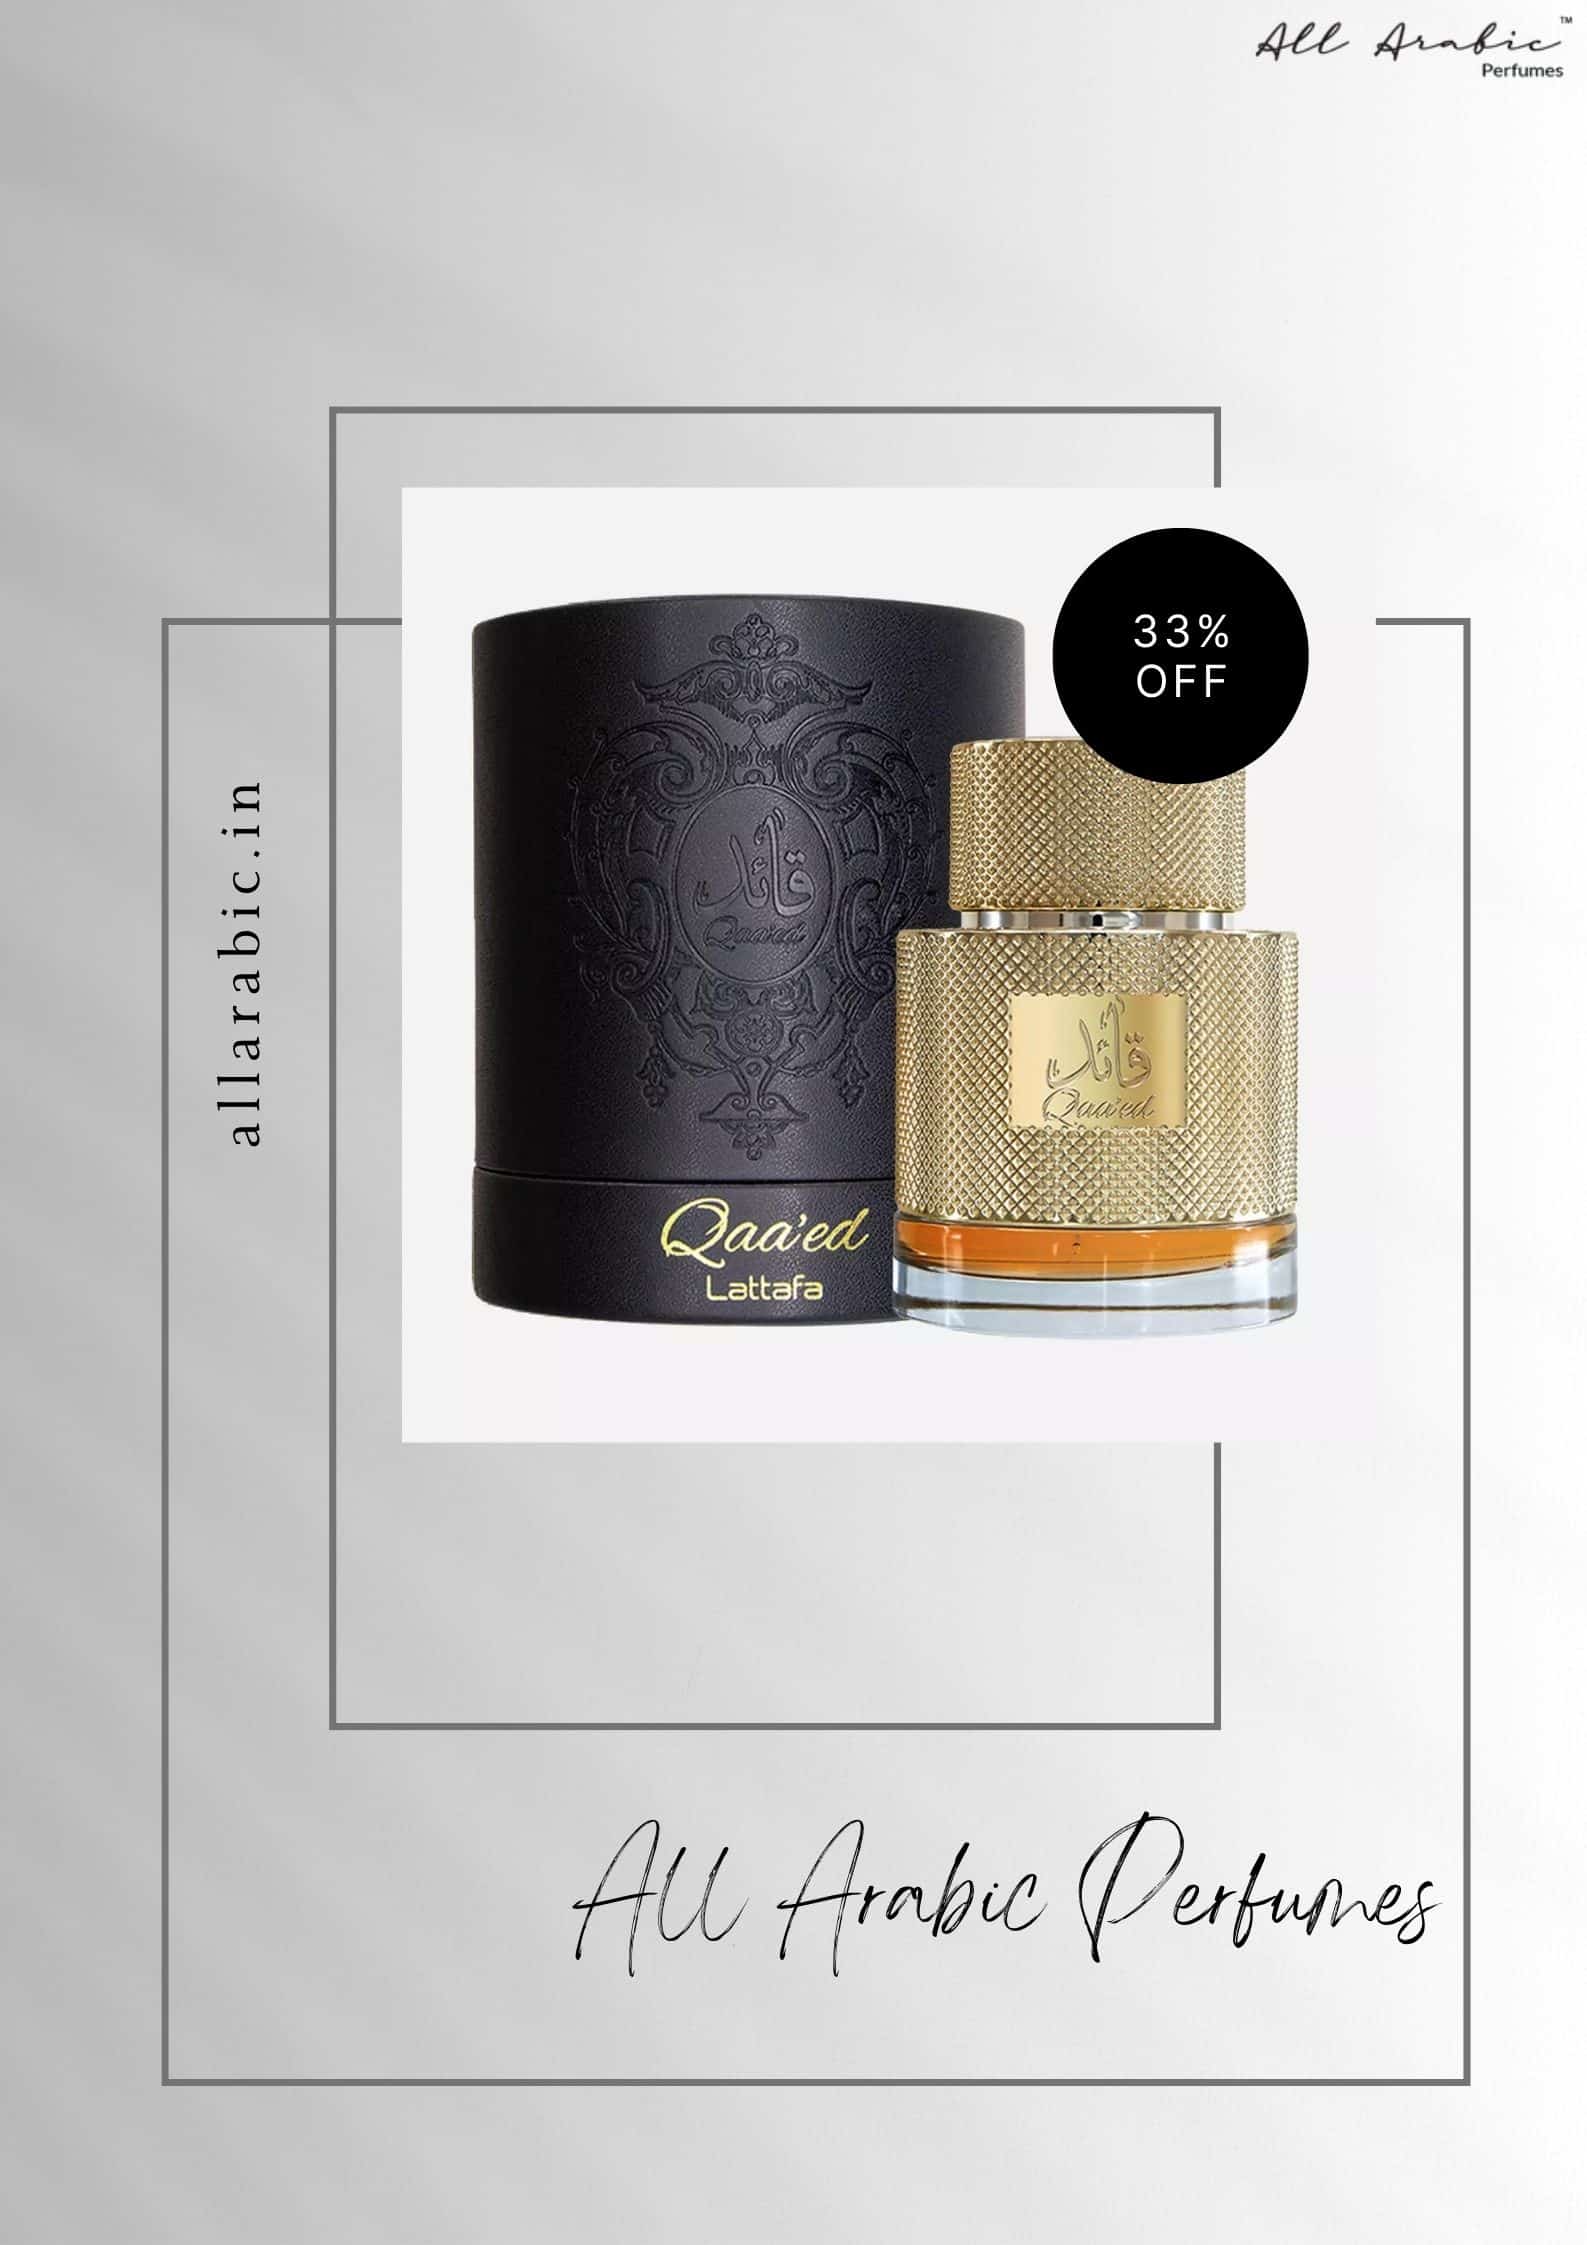 All Arabic's Exquisite Scents - Immerse in Lattafa Ana Abiyedh Bliss!